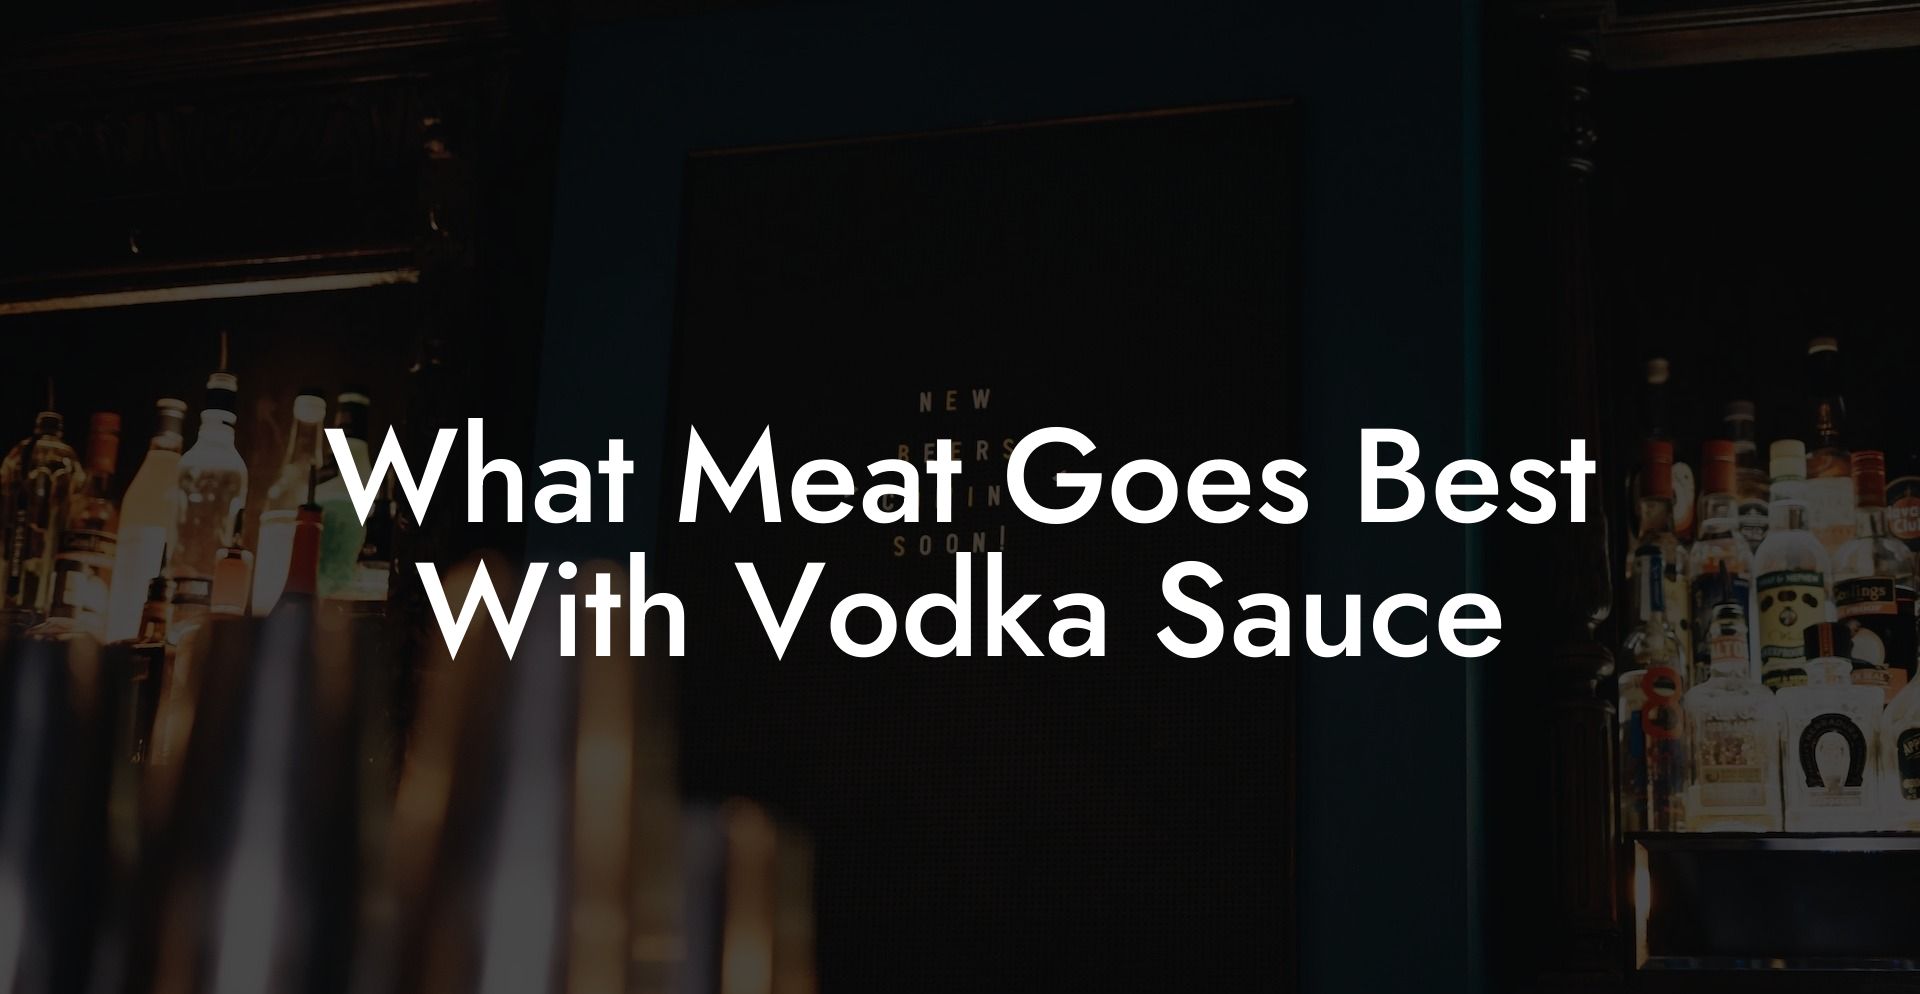 What Meat Goes Best With Vodka Sauce